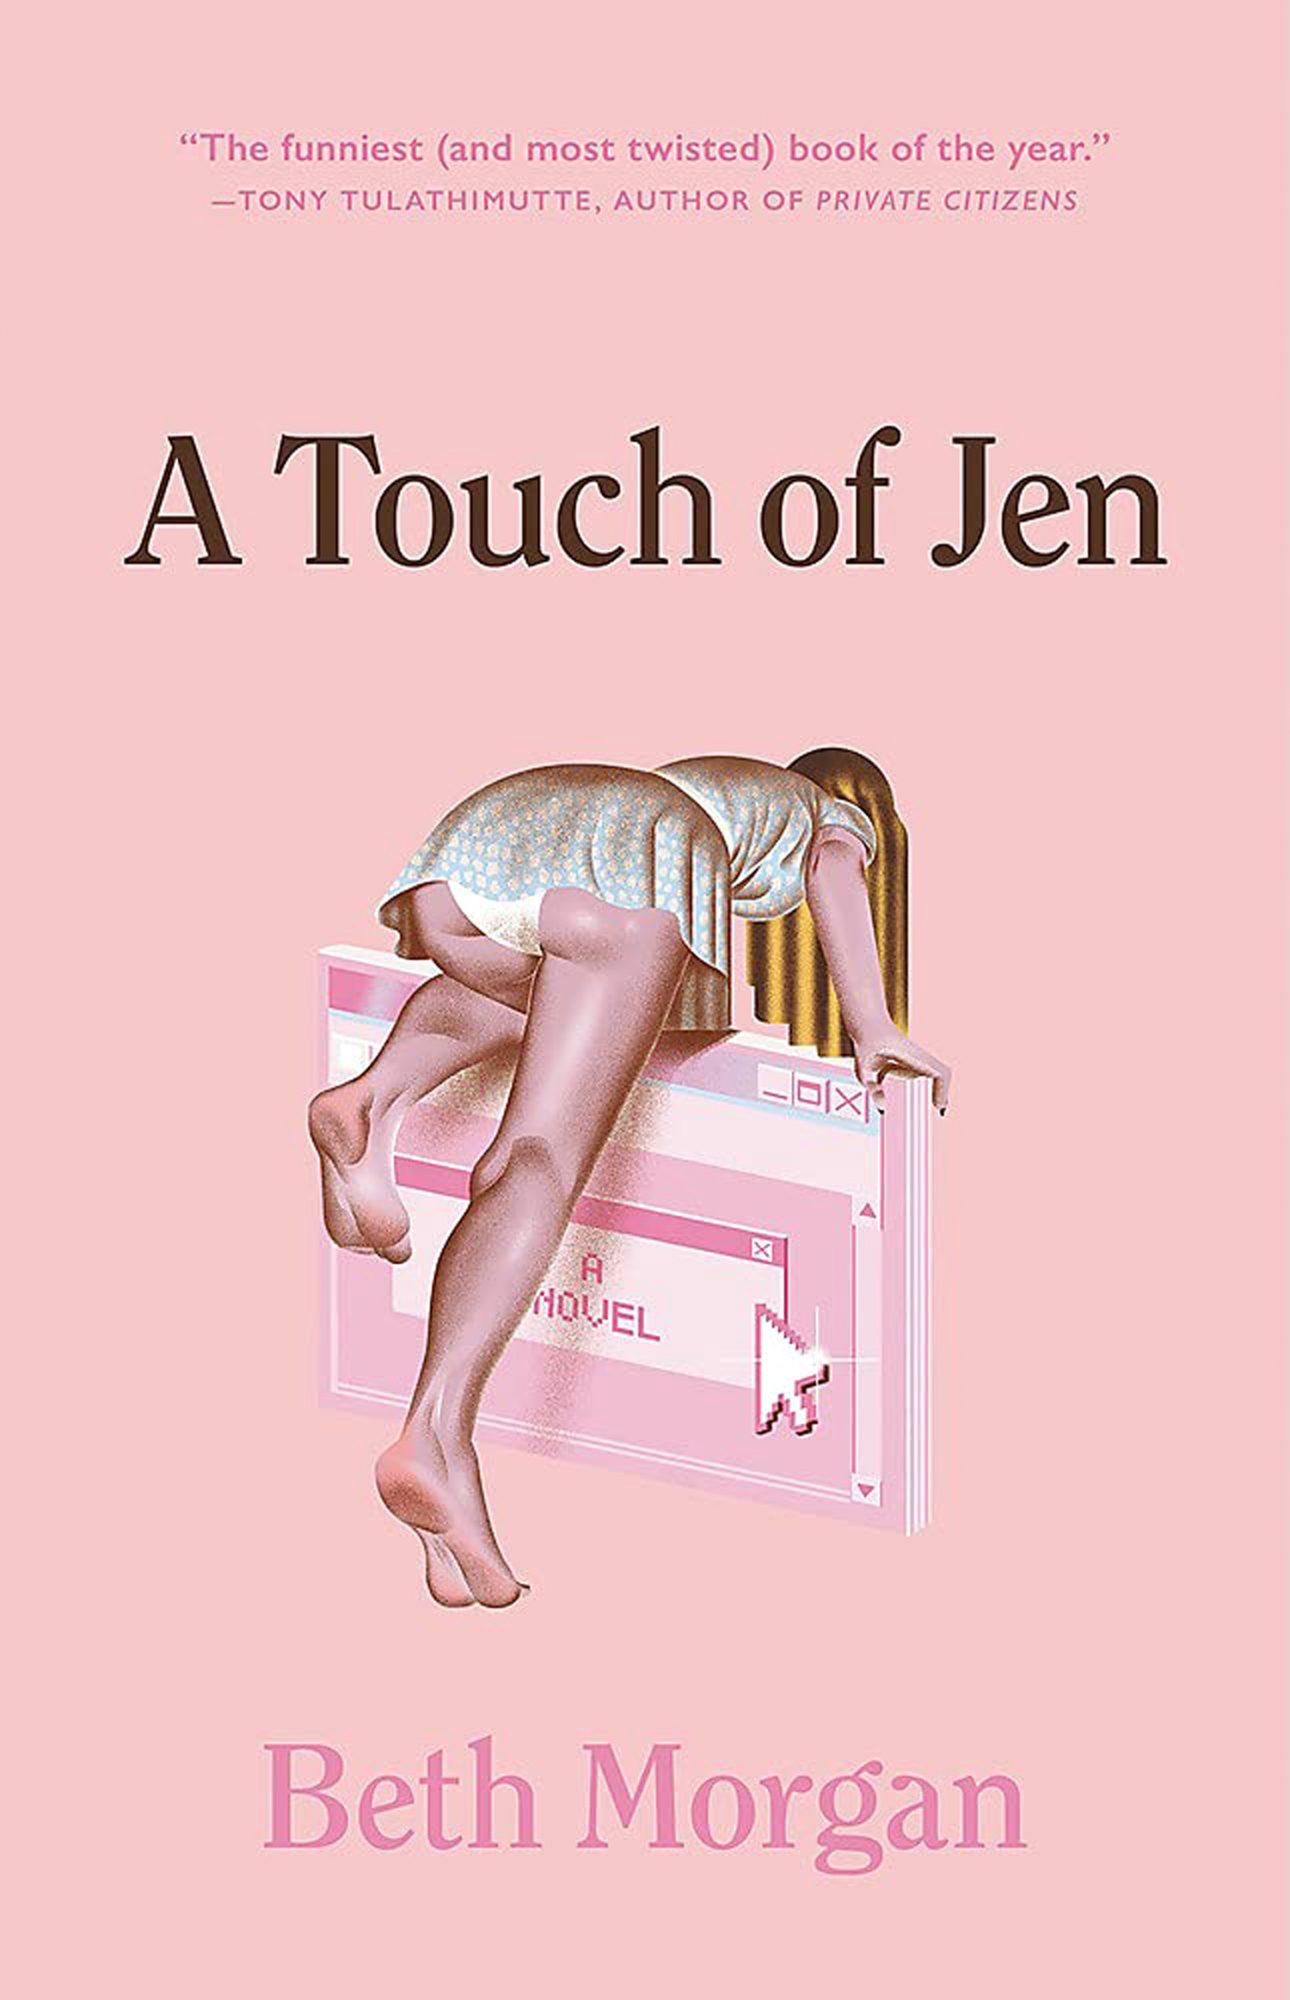 A Touch of Jen, by Beth Morgan